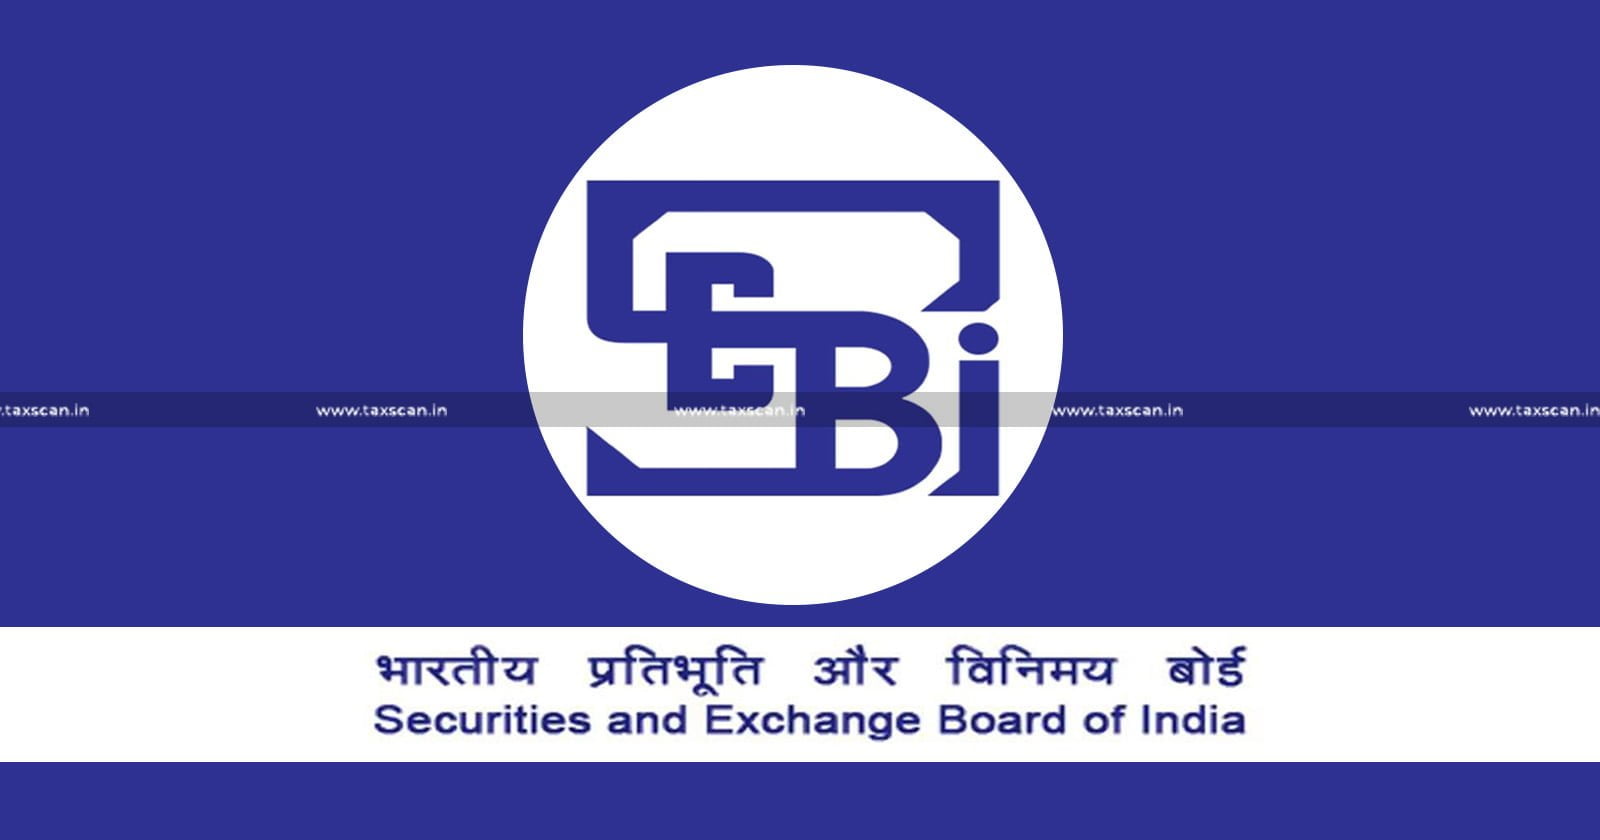 Settlement Proceedings - Settlement Proceedings shall be Disposed by Panel of Whole Time Members - SEBI - SEBI notifies SEBI (Settlement Proceedings) (Second Amendment) Regulations - Taxscan